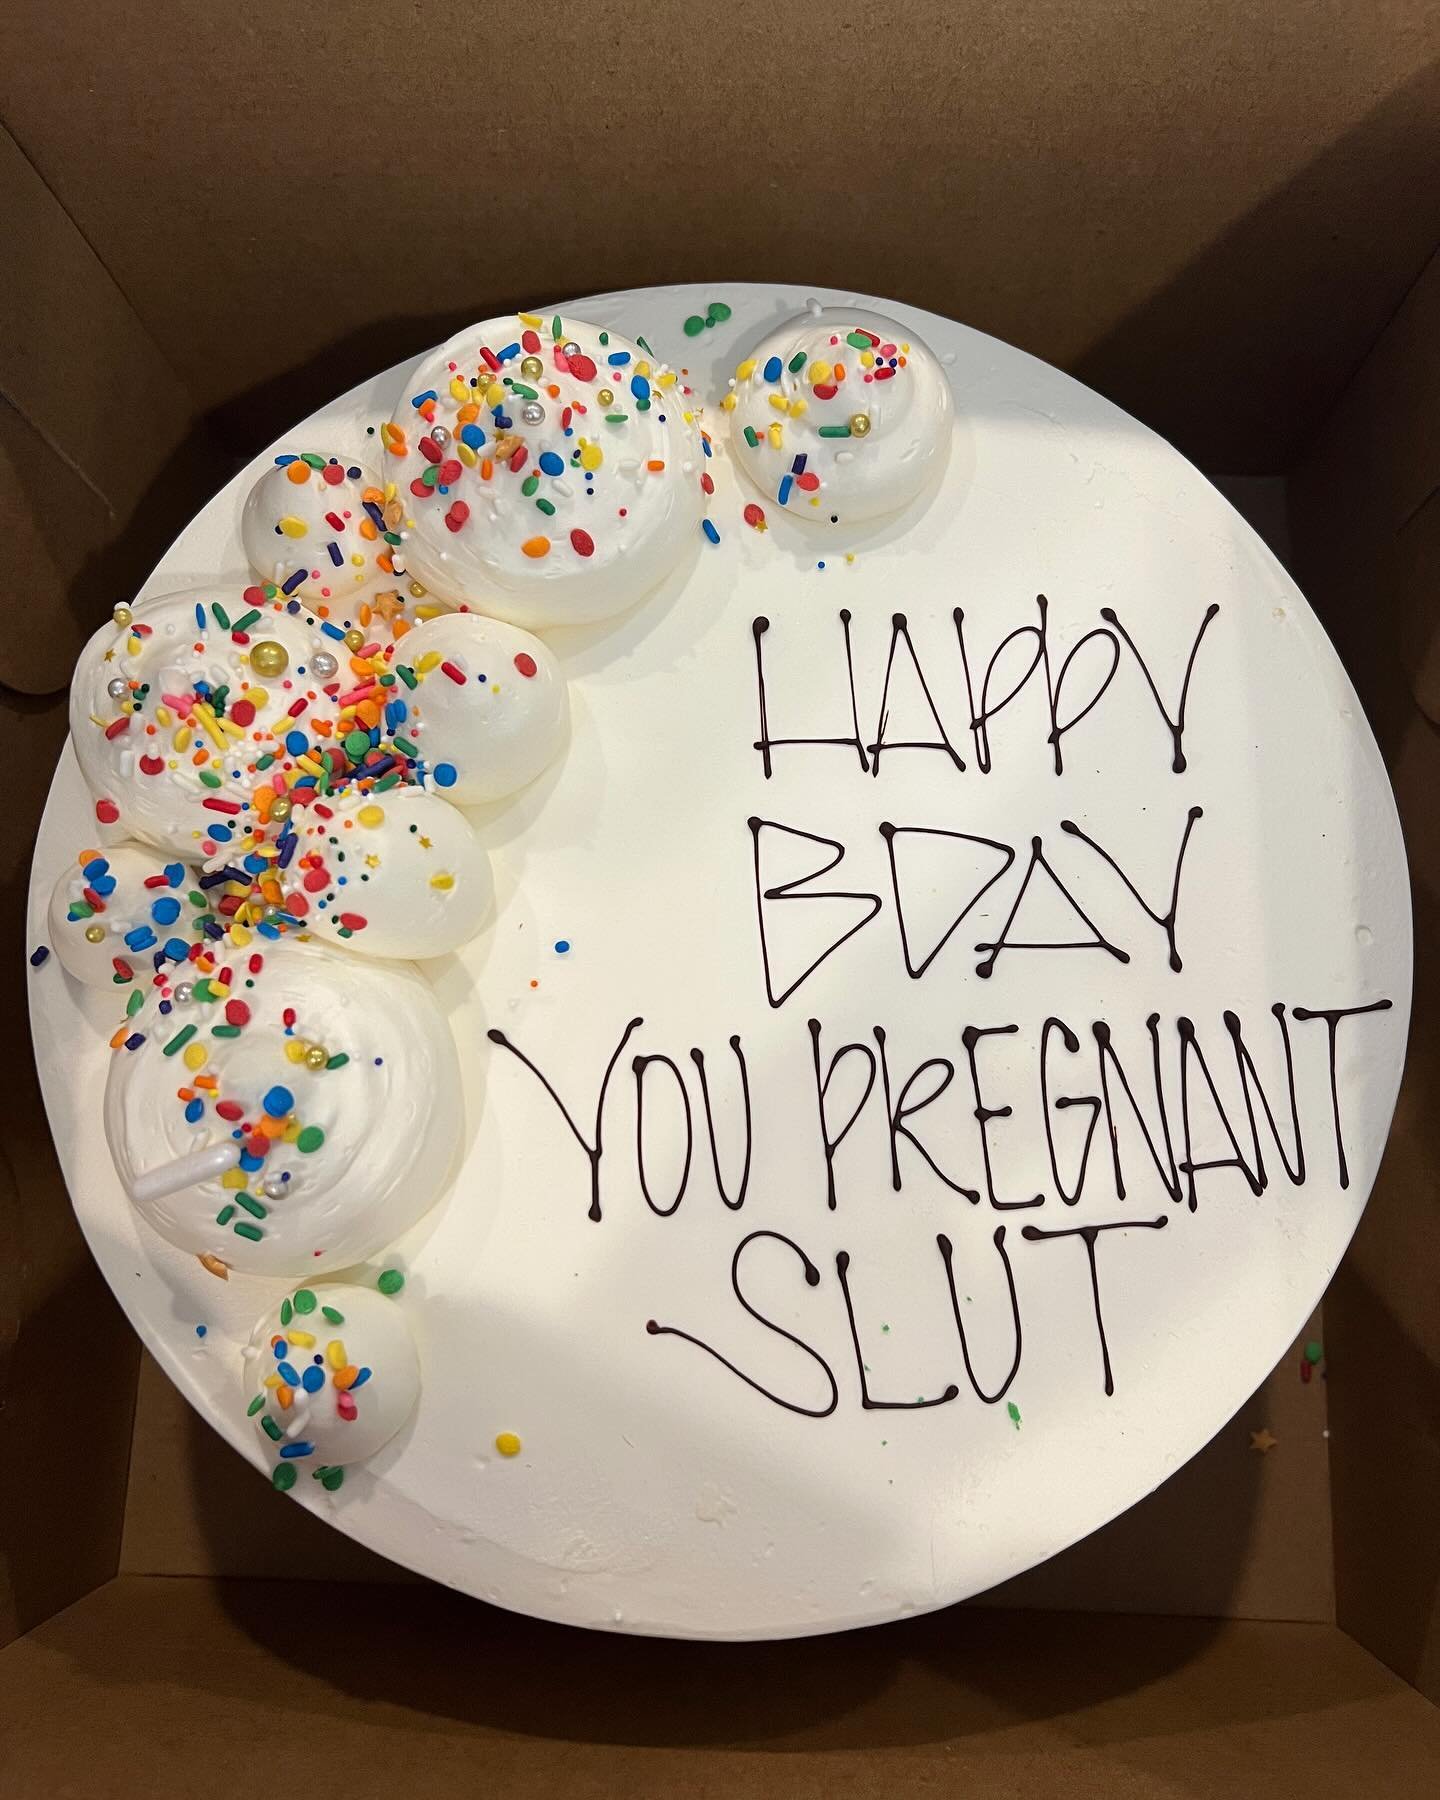 one last round-up from the first three months:

1. the best birthday cake ever from my dear, loving husband. harrison buttlicker could never.
2. the adorable onesie we used to tell zac&rsquo;s parents
3. when i went apeshit on snacks
4. the sweetest 